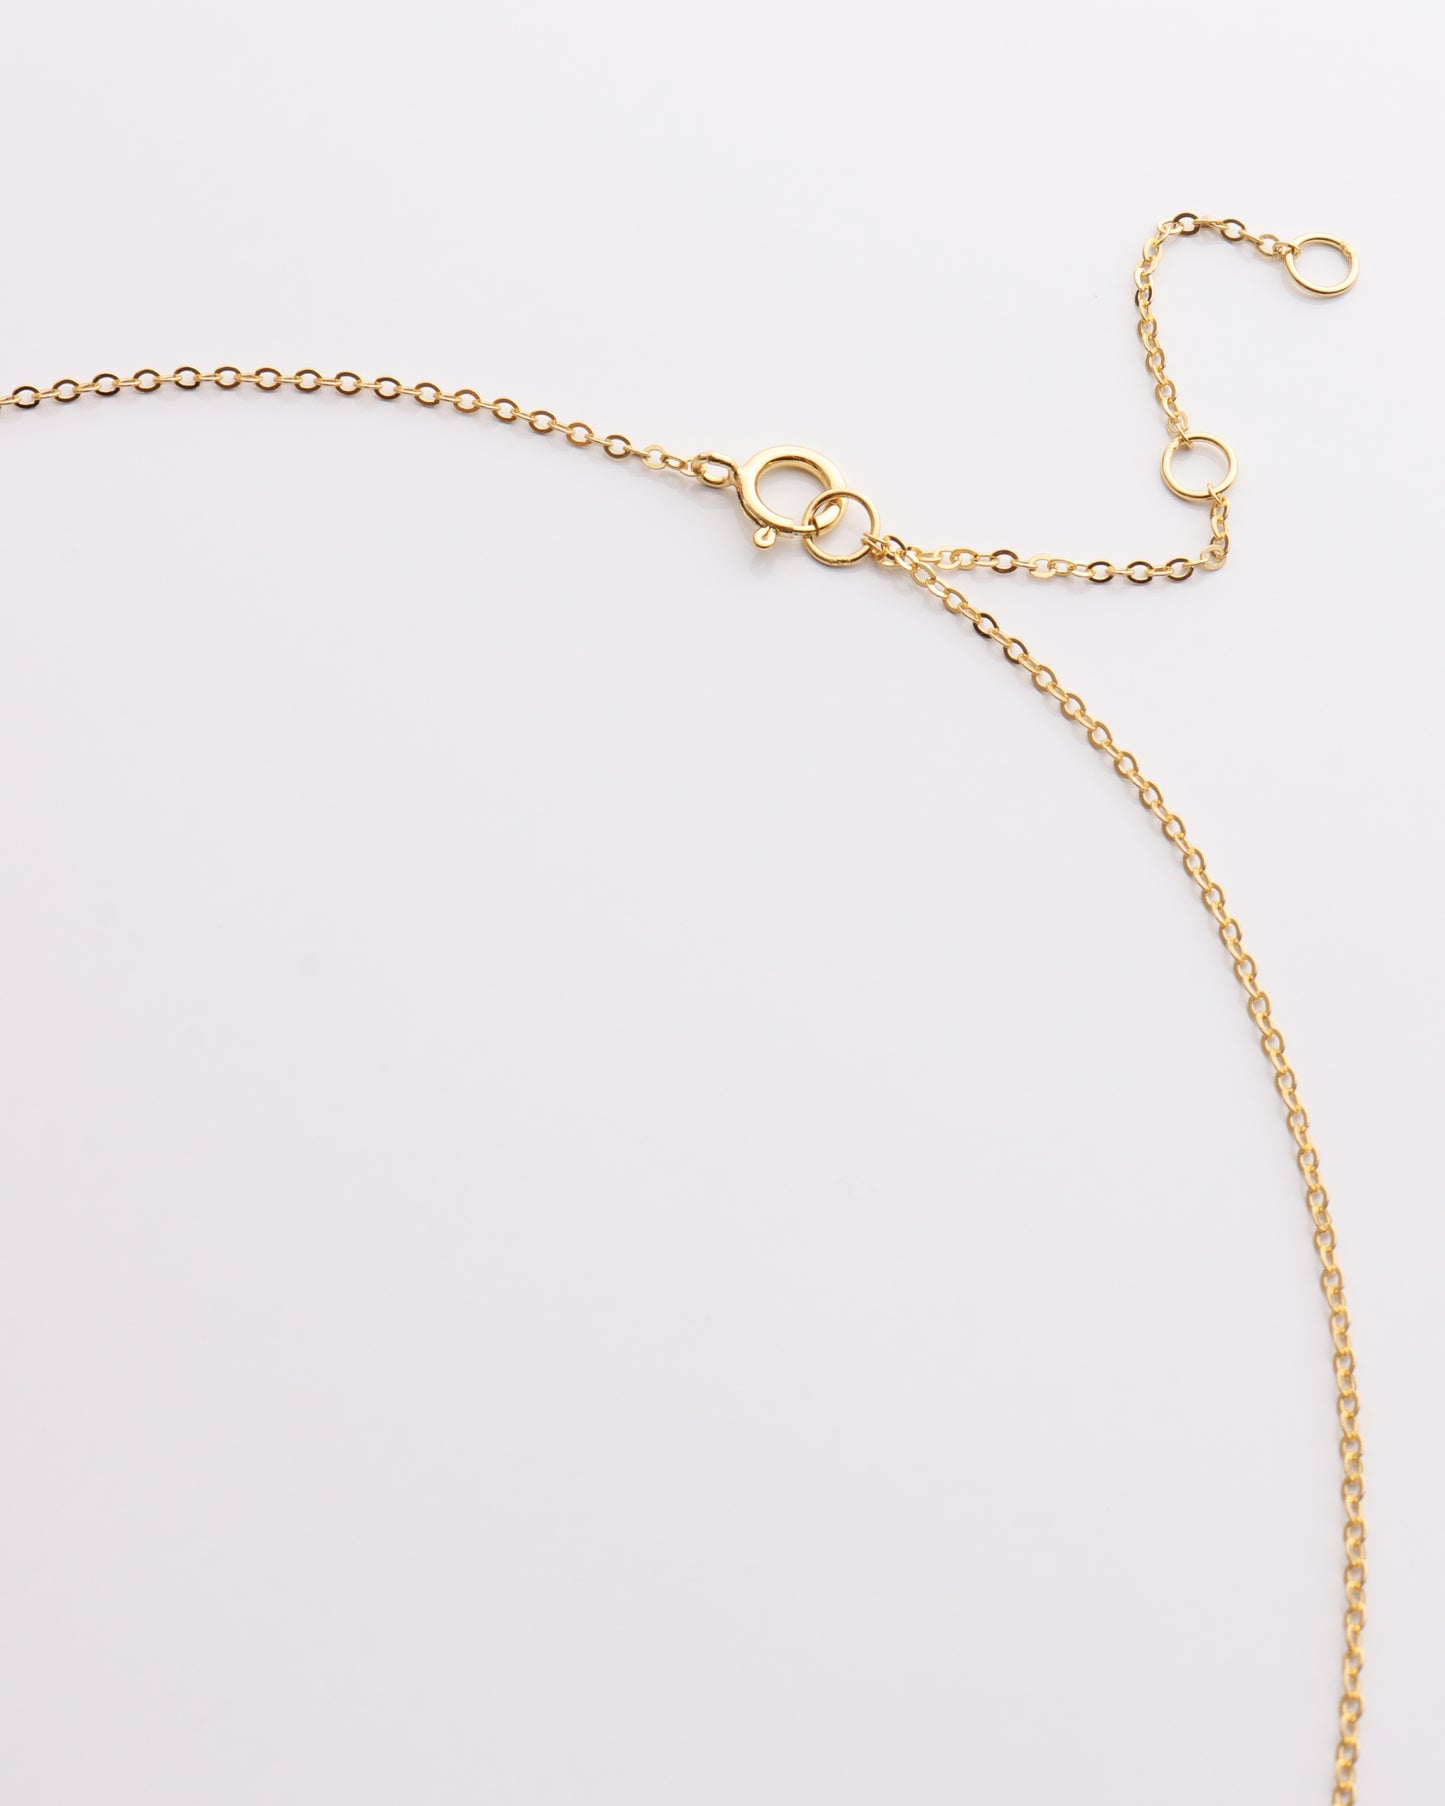 Curved Bar CZ Necklace